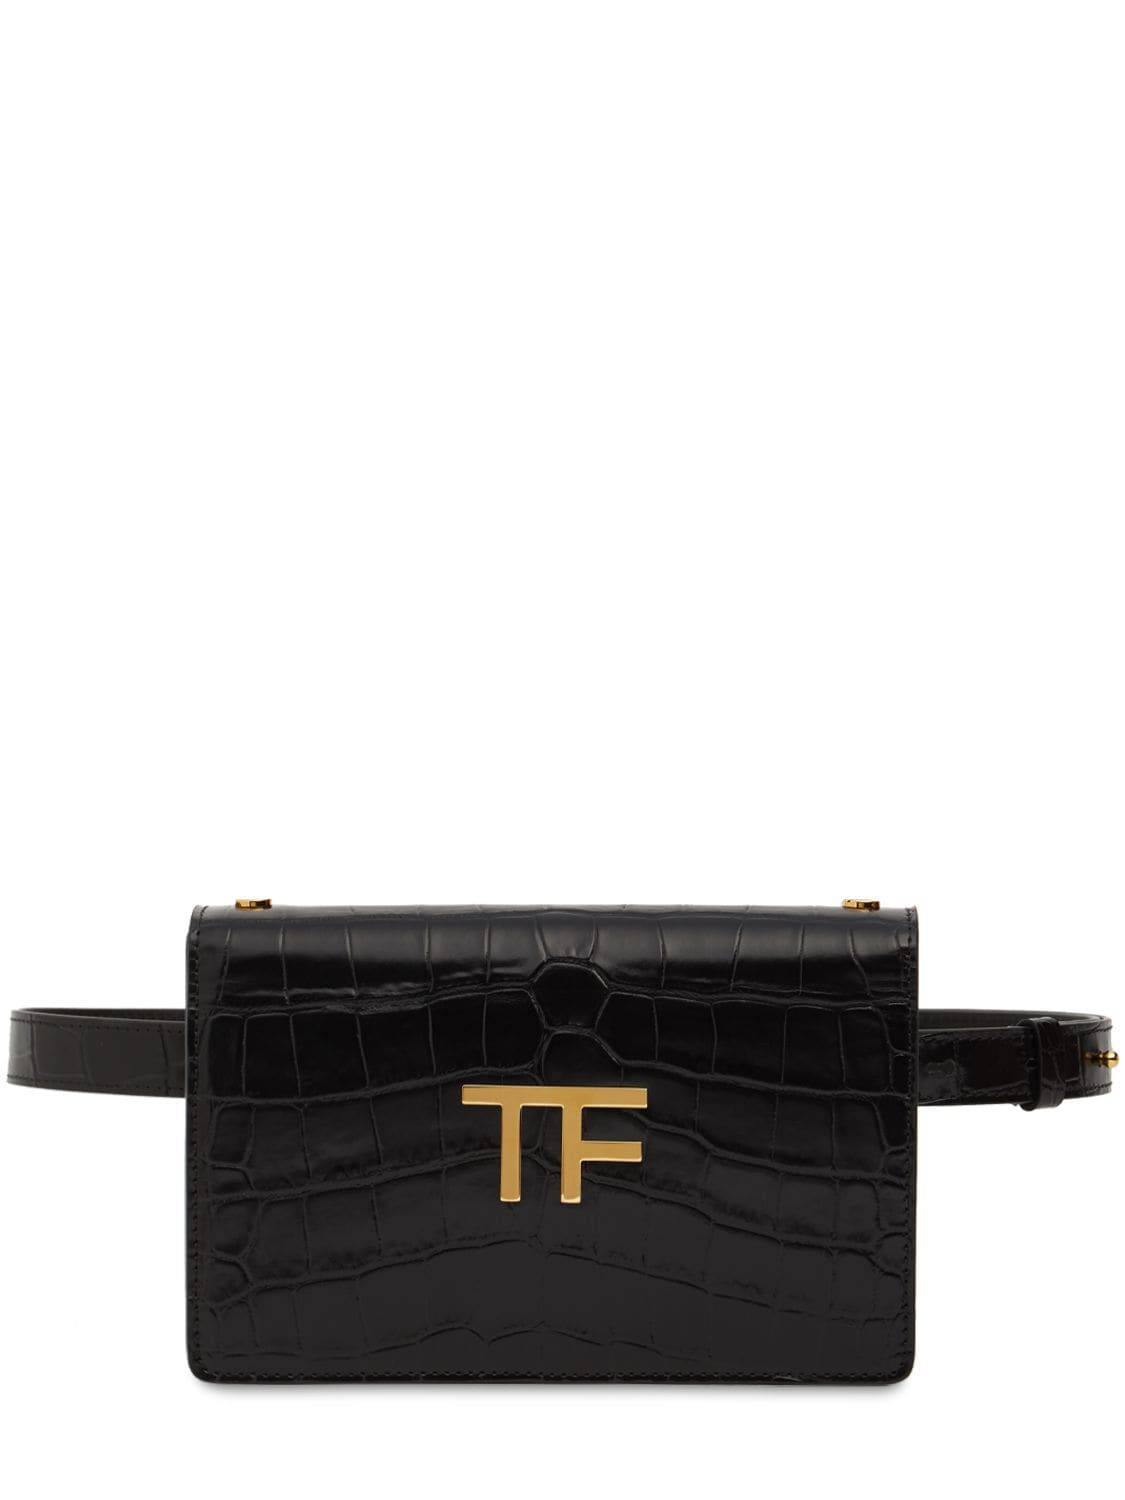 Shiny Stamped Crocodile Leather Classic TF Multifunctional Wallet | Tom Ford | Black